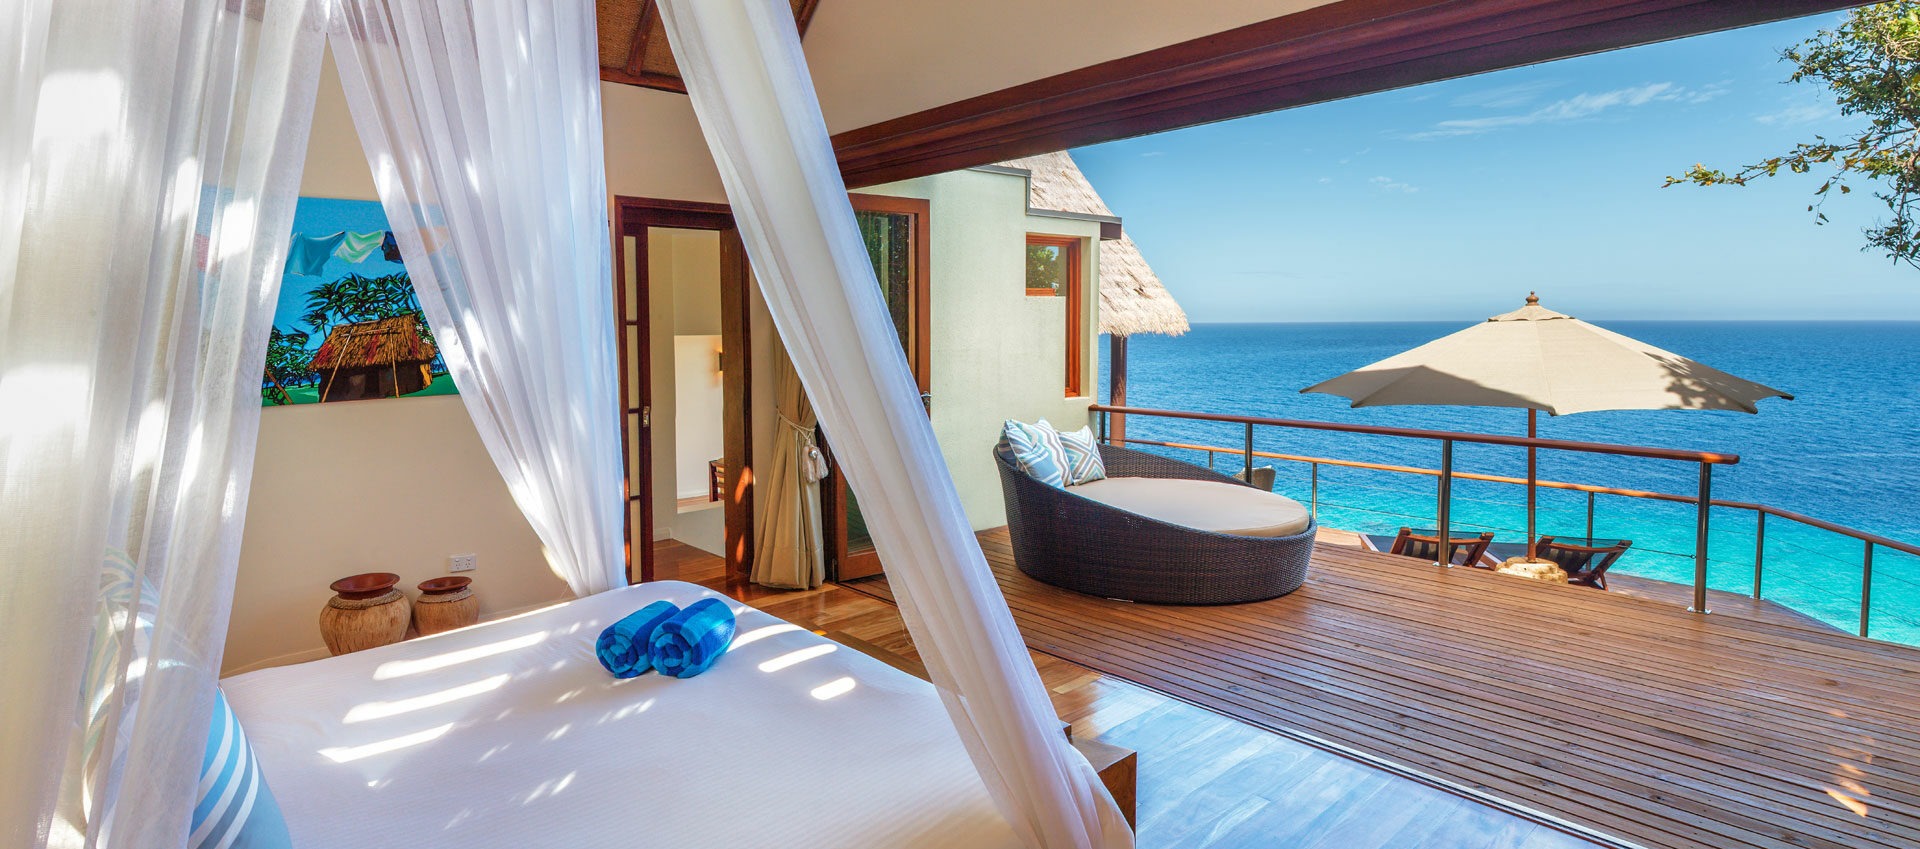 A room with a beautiful view on the ocean